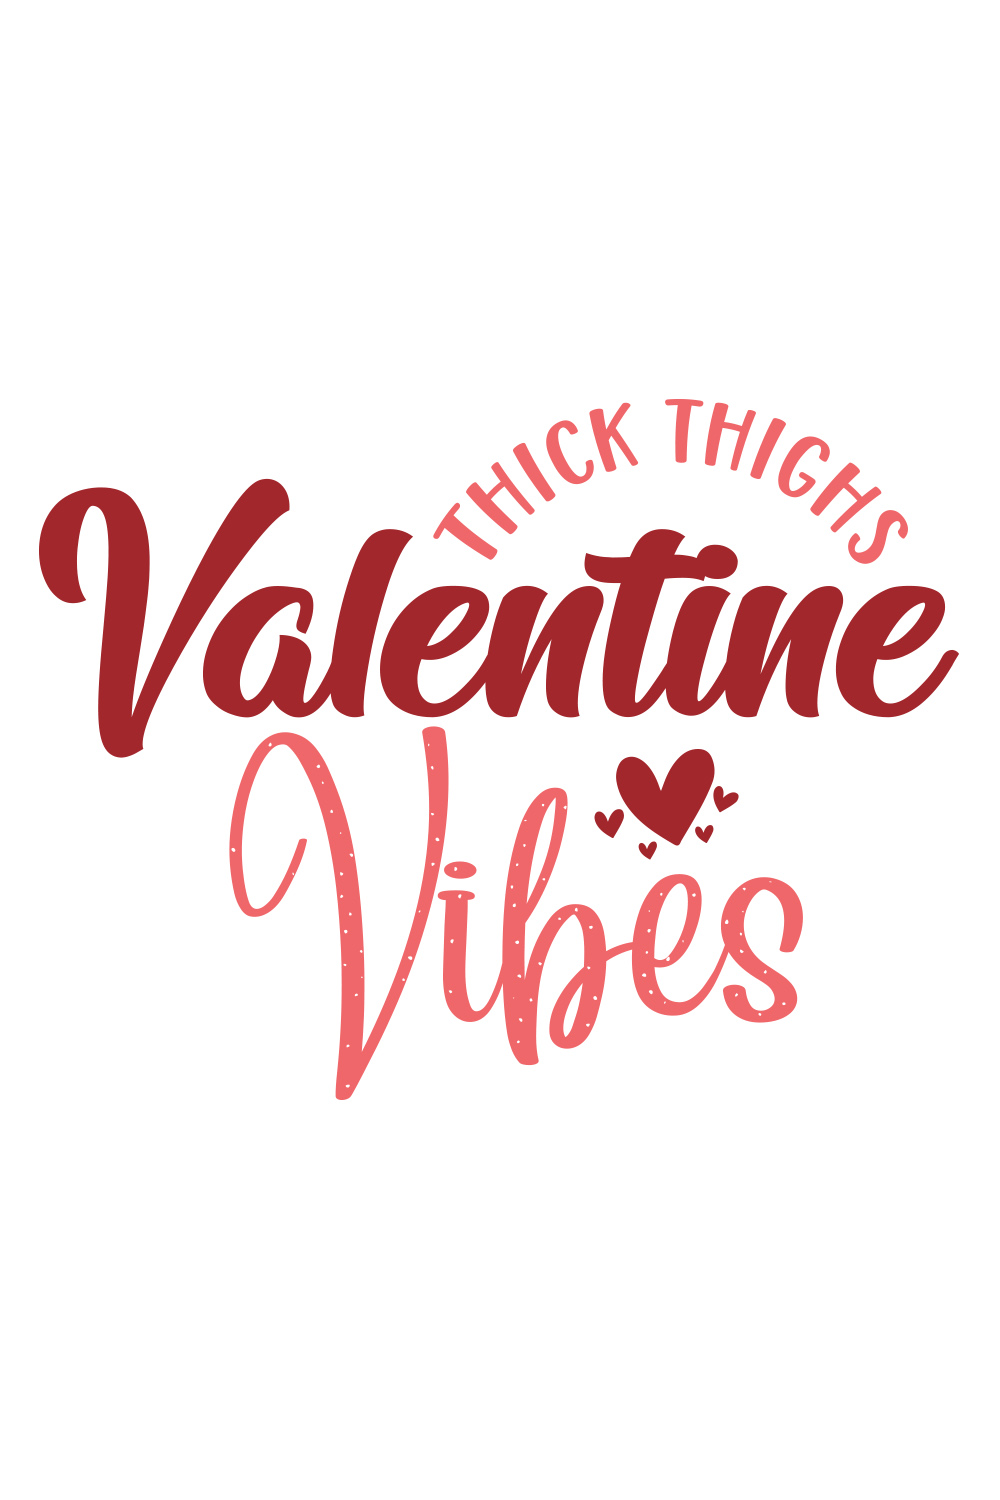 Image with colorful print lettering Thick Thighs Valentine Vibes